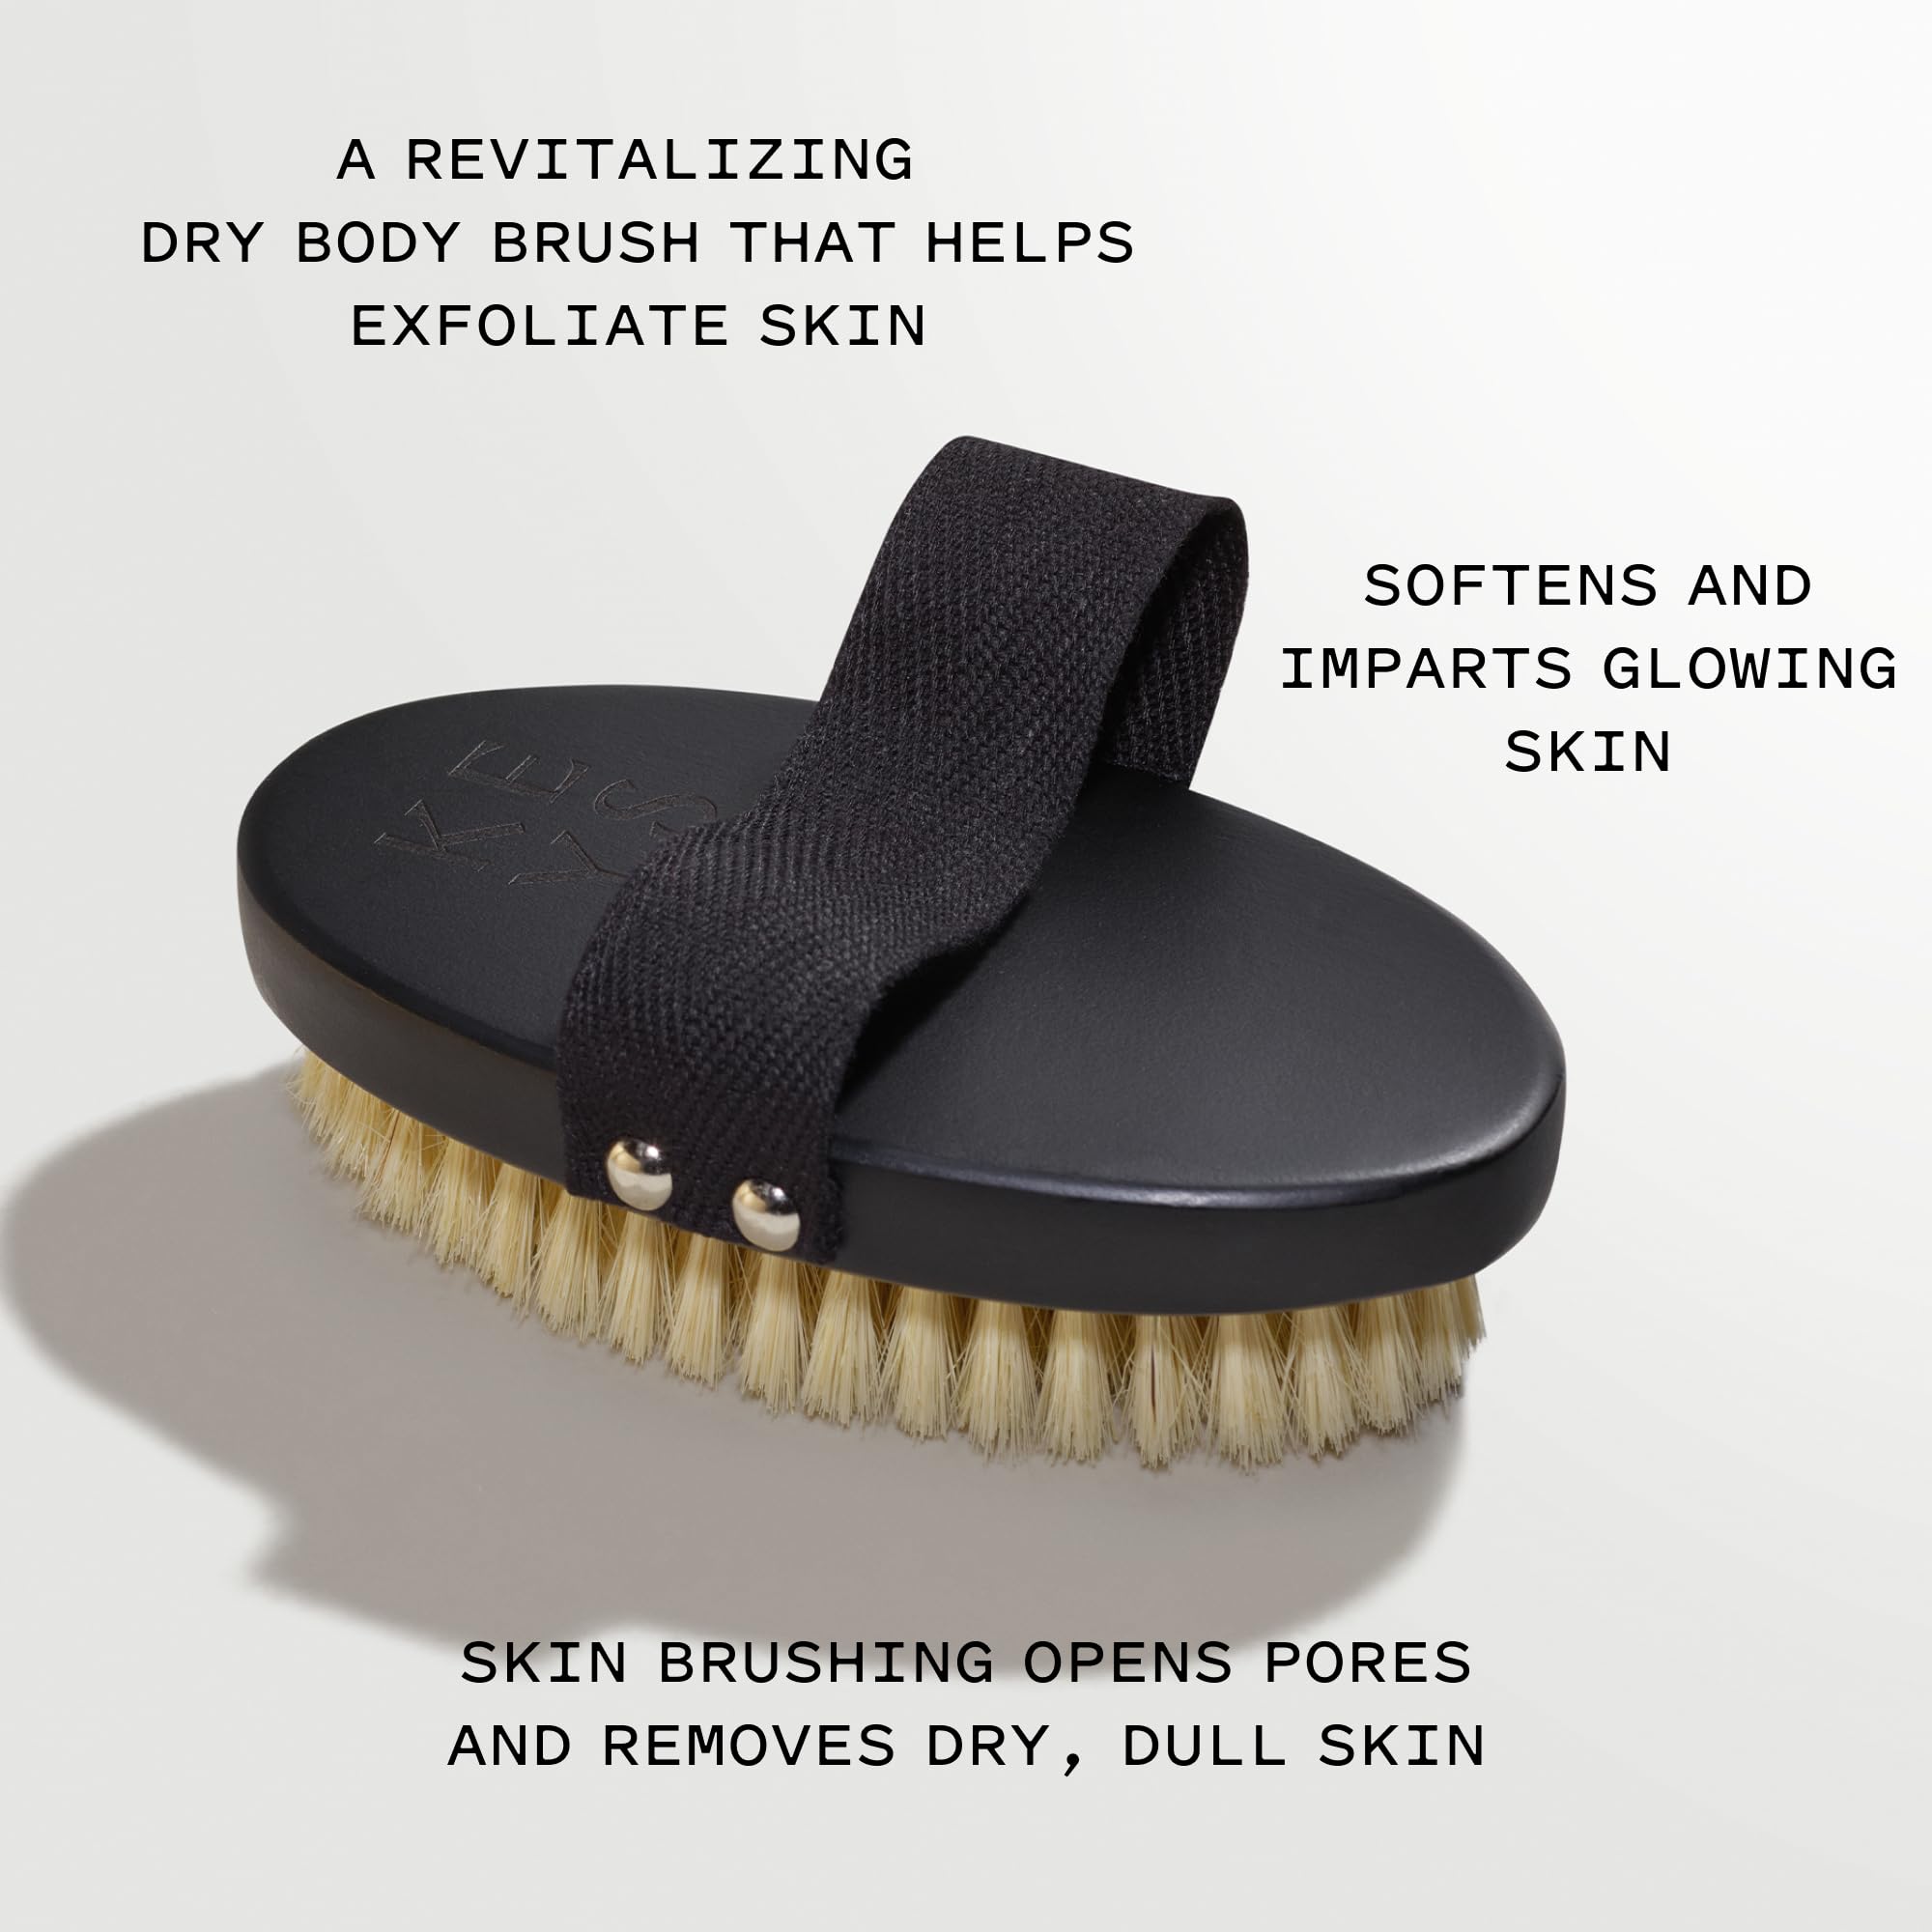 Keys Soulcare Energizing Dry Body Brush, Gently Exfoliates & Opens Pores for Soft, Smooth, Brighter & Glowing Skin, Vegan, Cruelty-Free